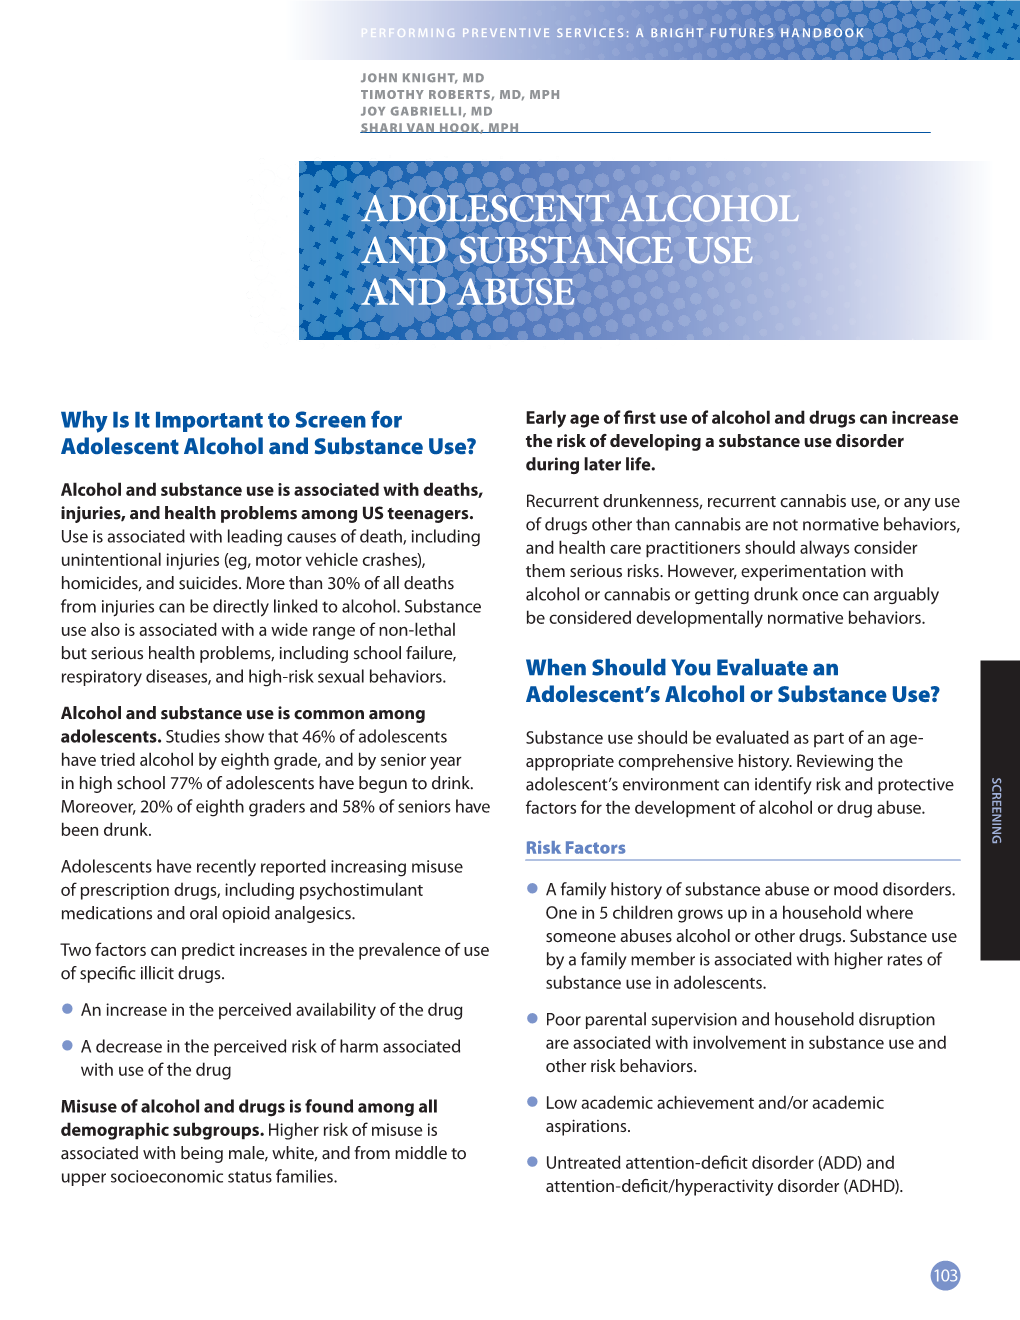 Adolescent Alcohol and Substance Abuse